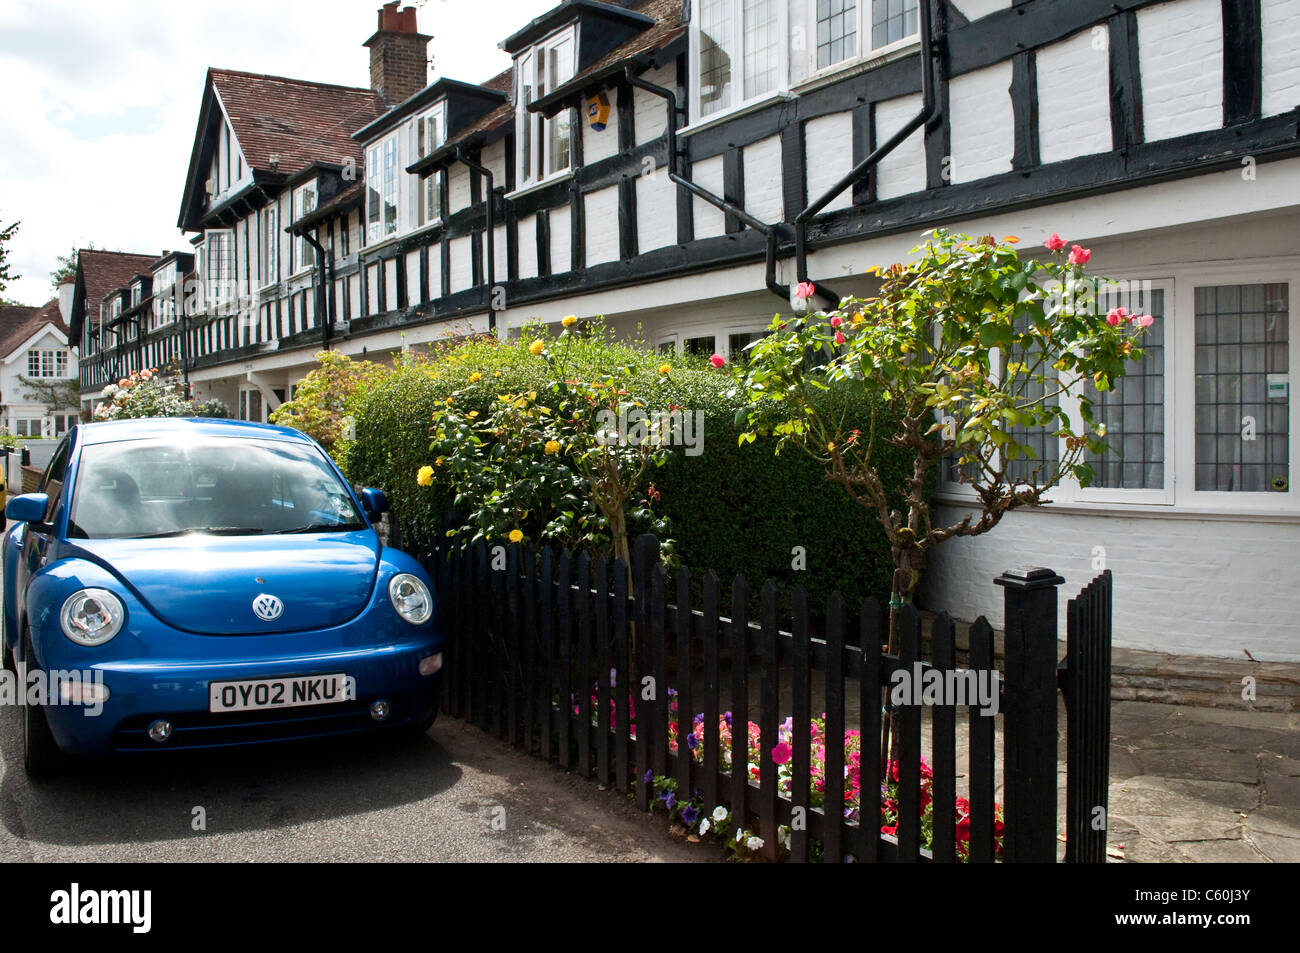 Street with row of houses and new Volkswagen beetle car, Bray, Berkshire, England, UK Stock Photo